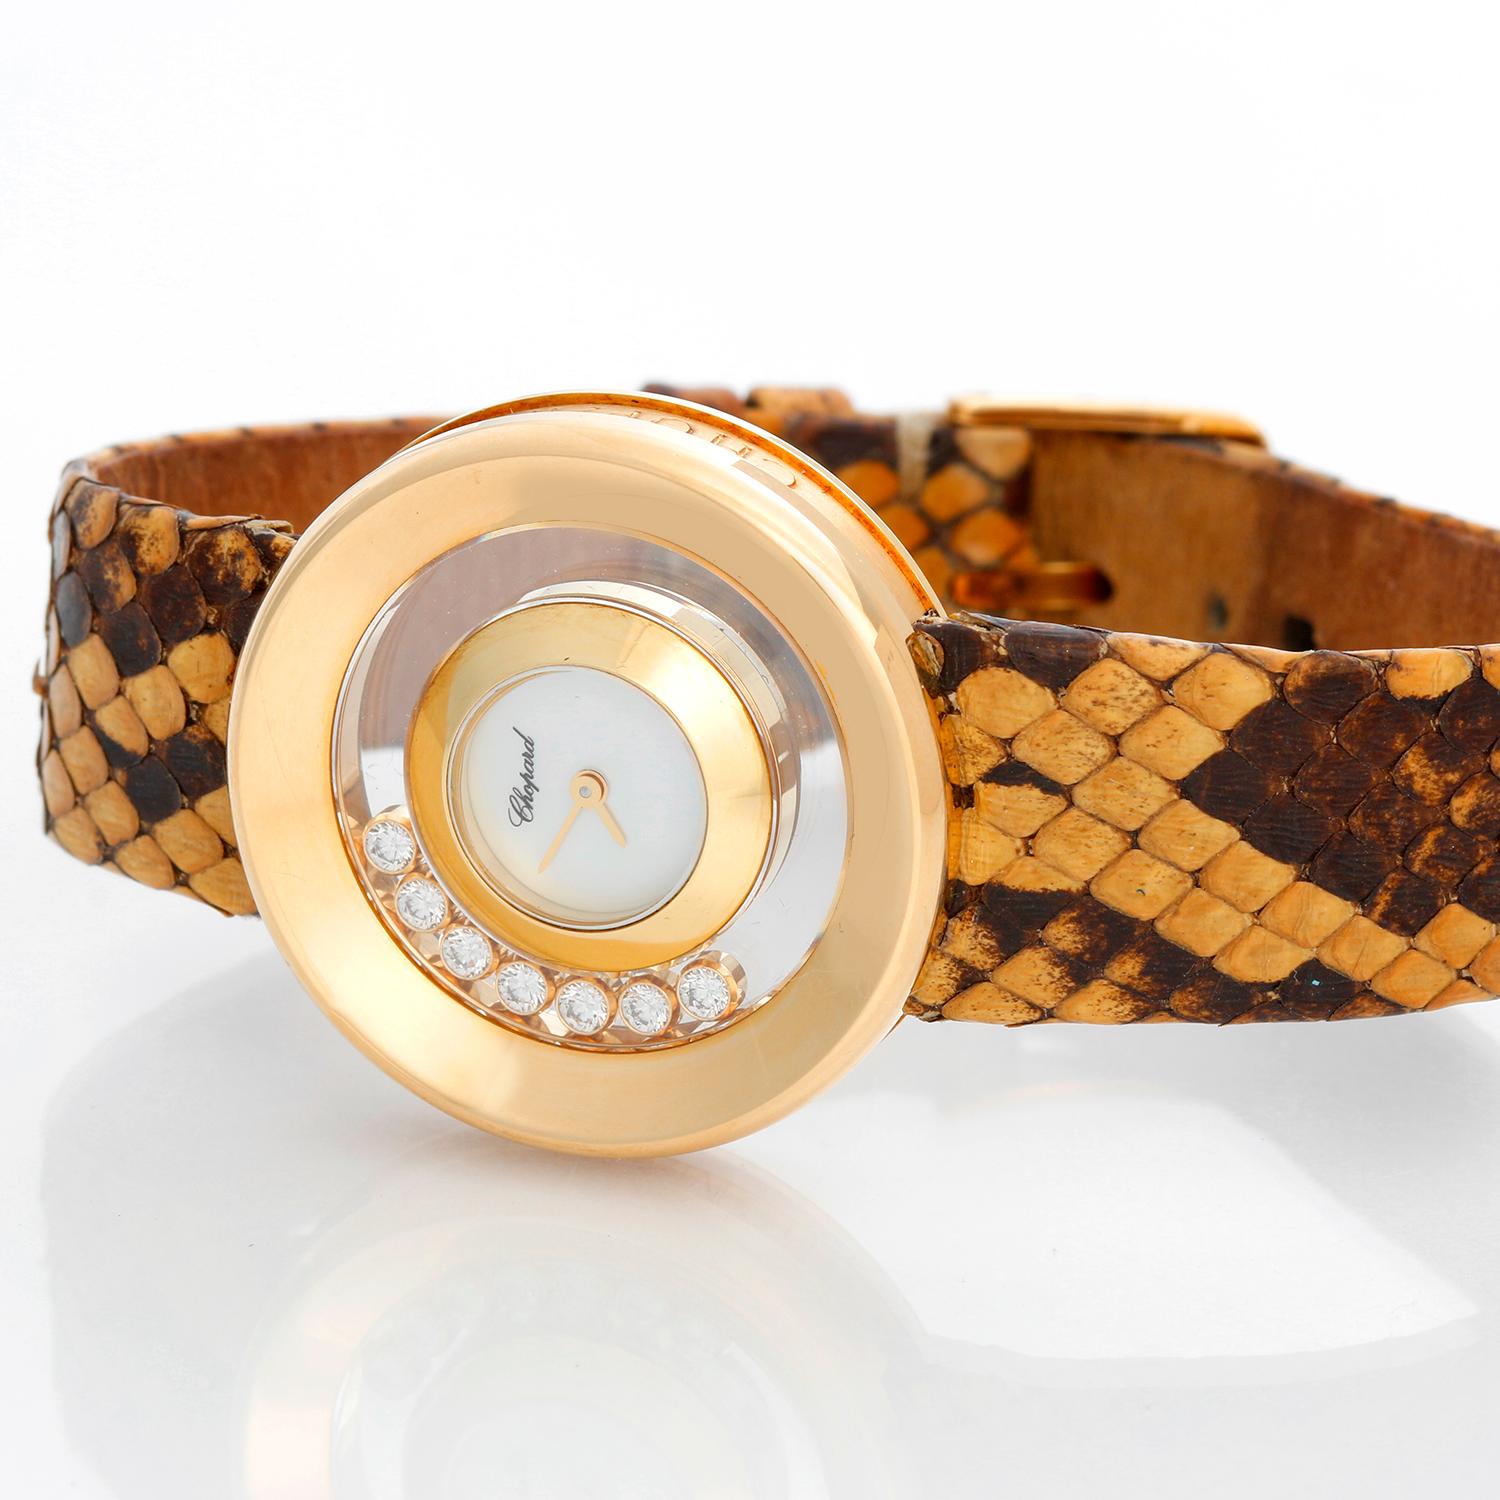 Chopard Happy Diamonds 18K Yellow Gold Ladies Watch - Quartz. 18K yellow gold case with 7 floating diamonds (31mm). Mother of pearl dial . Brown snakeskin strap with tang buckle . Pre-owned.